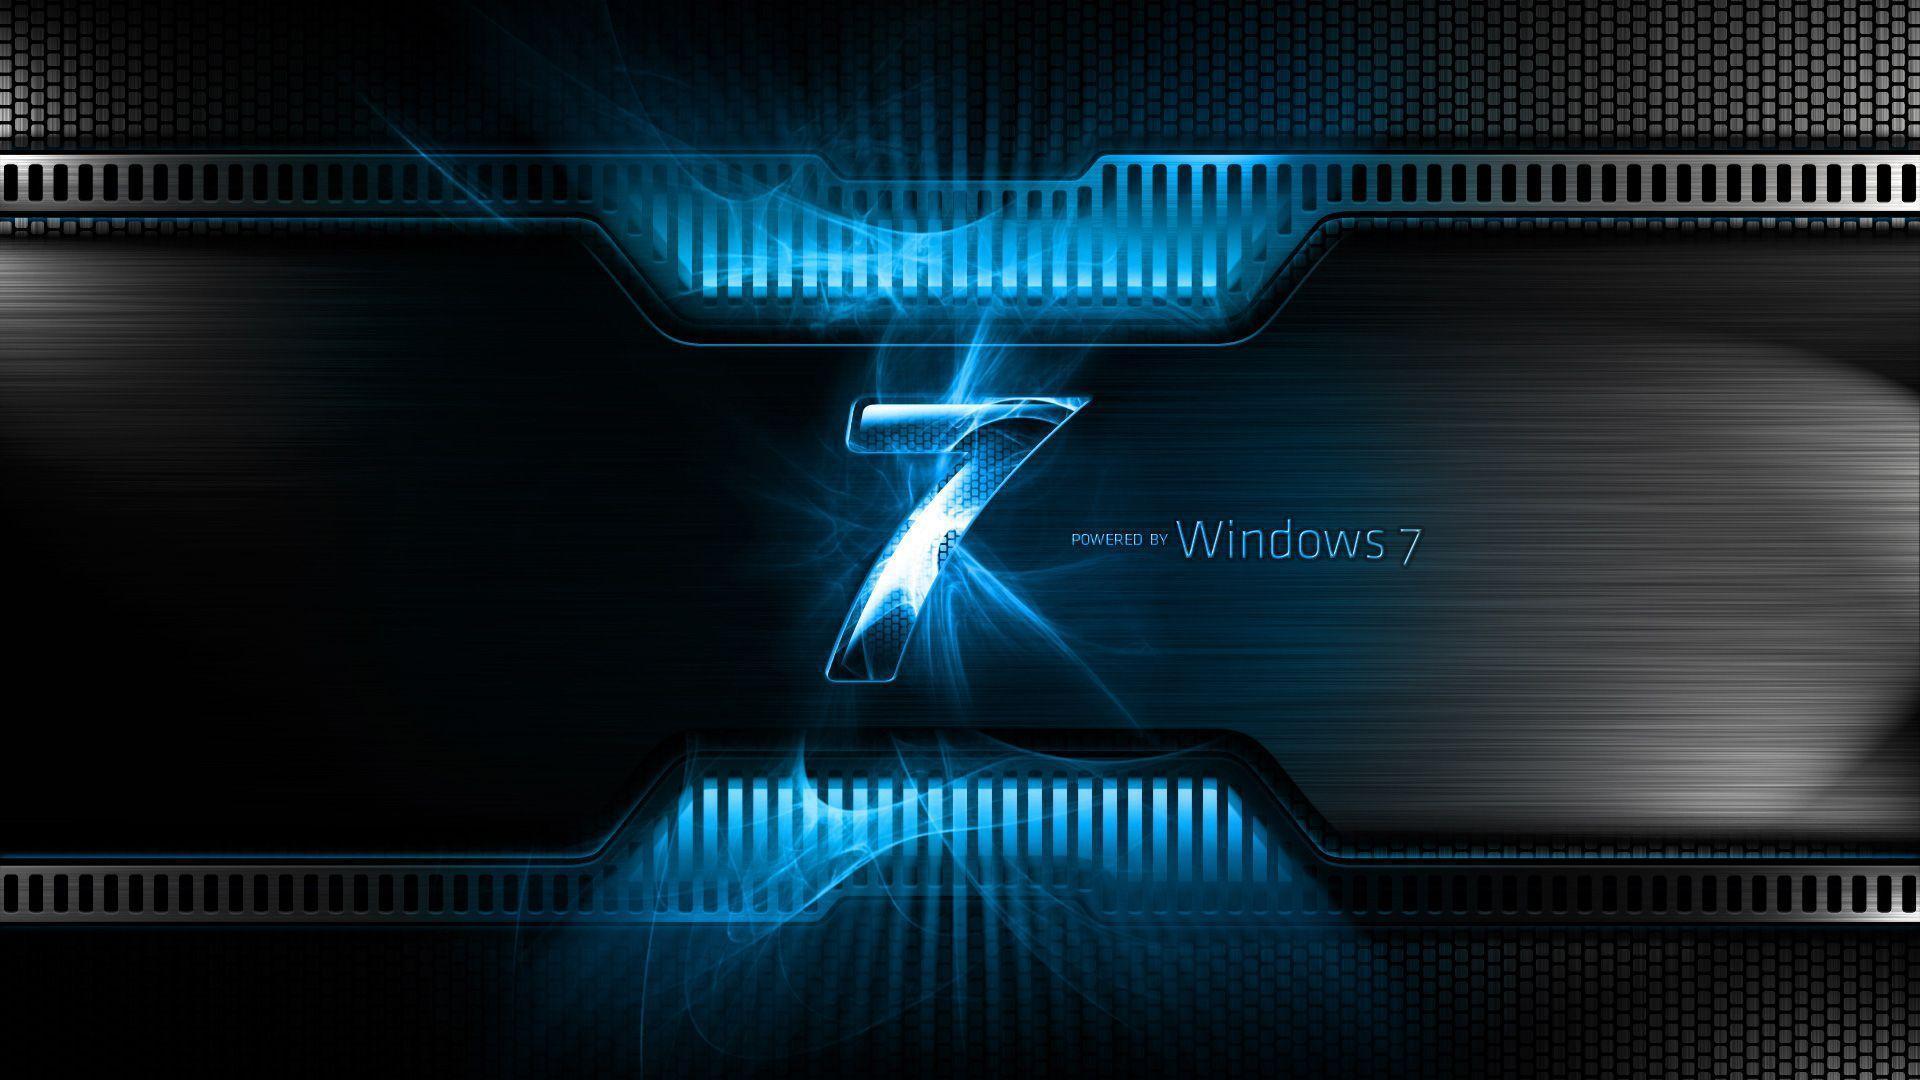 Wallpaper For > Windows 7 Ultimate Background 1080p